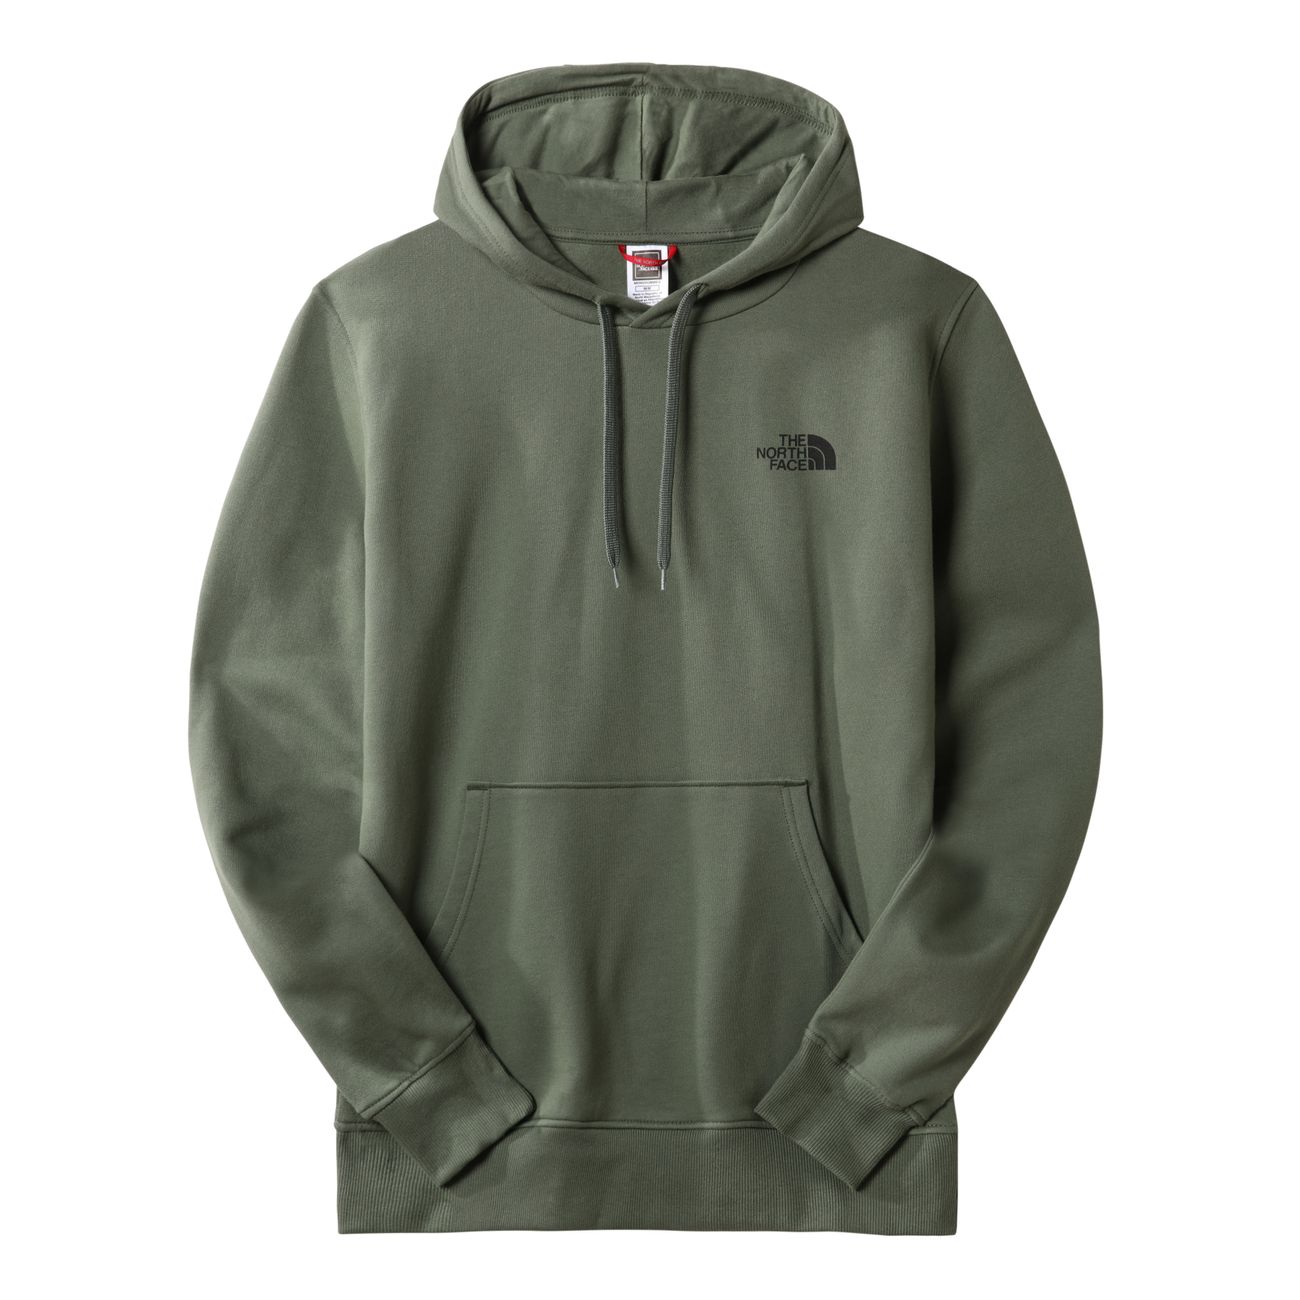 THE NORTH FACE M SIMPLE DOME HOODIE Herren Kapuzenpullover - The North Face - SAGATOO - 196248034775